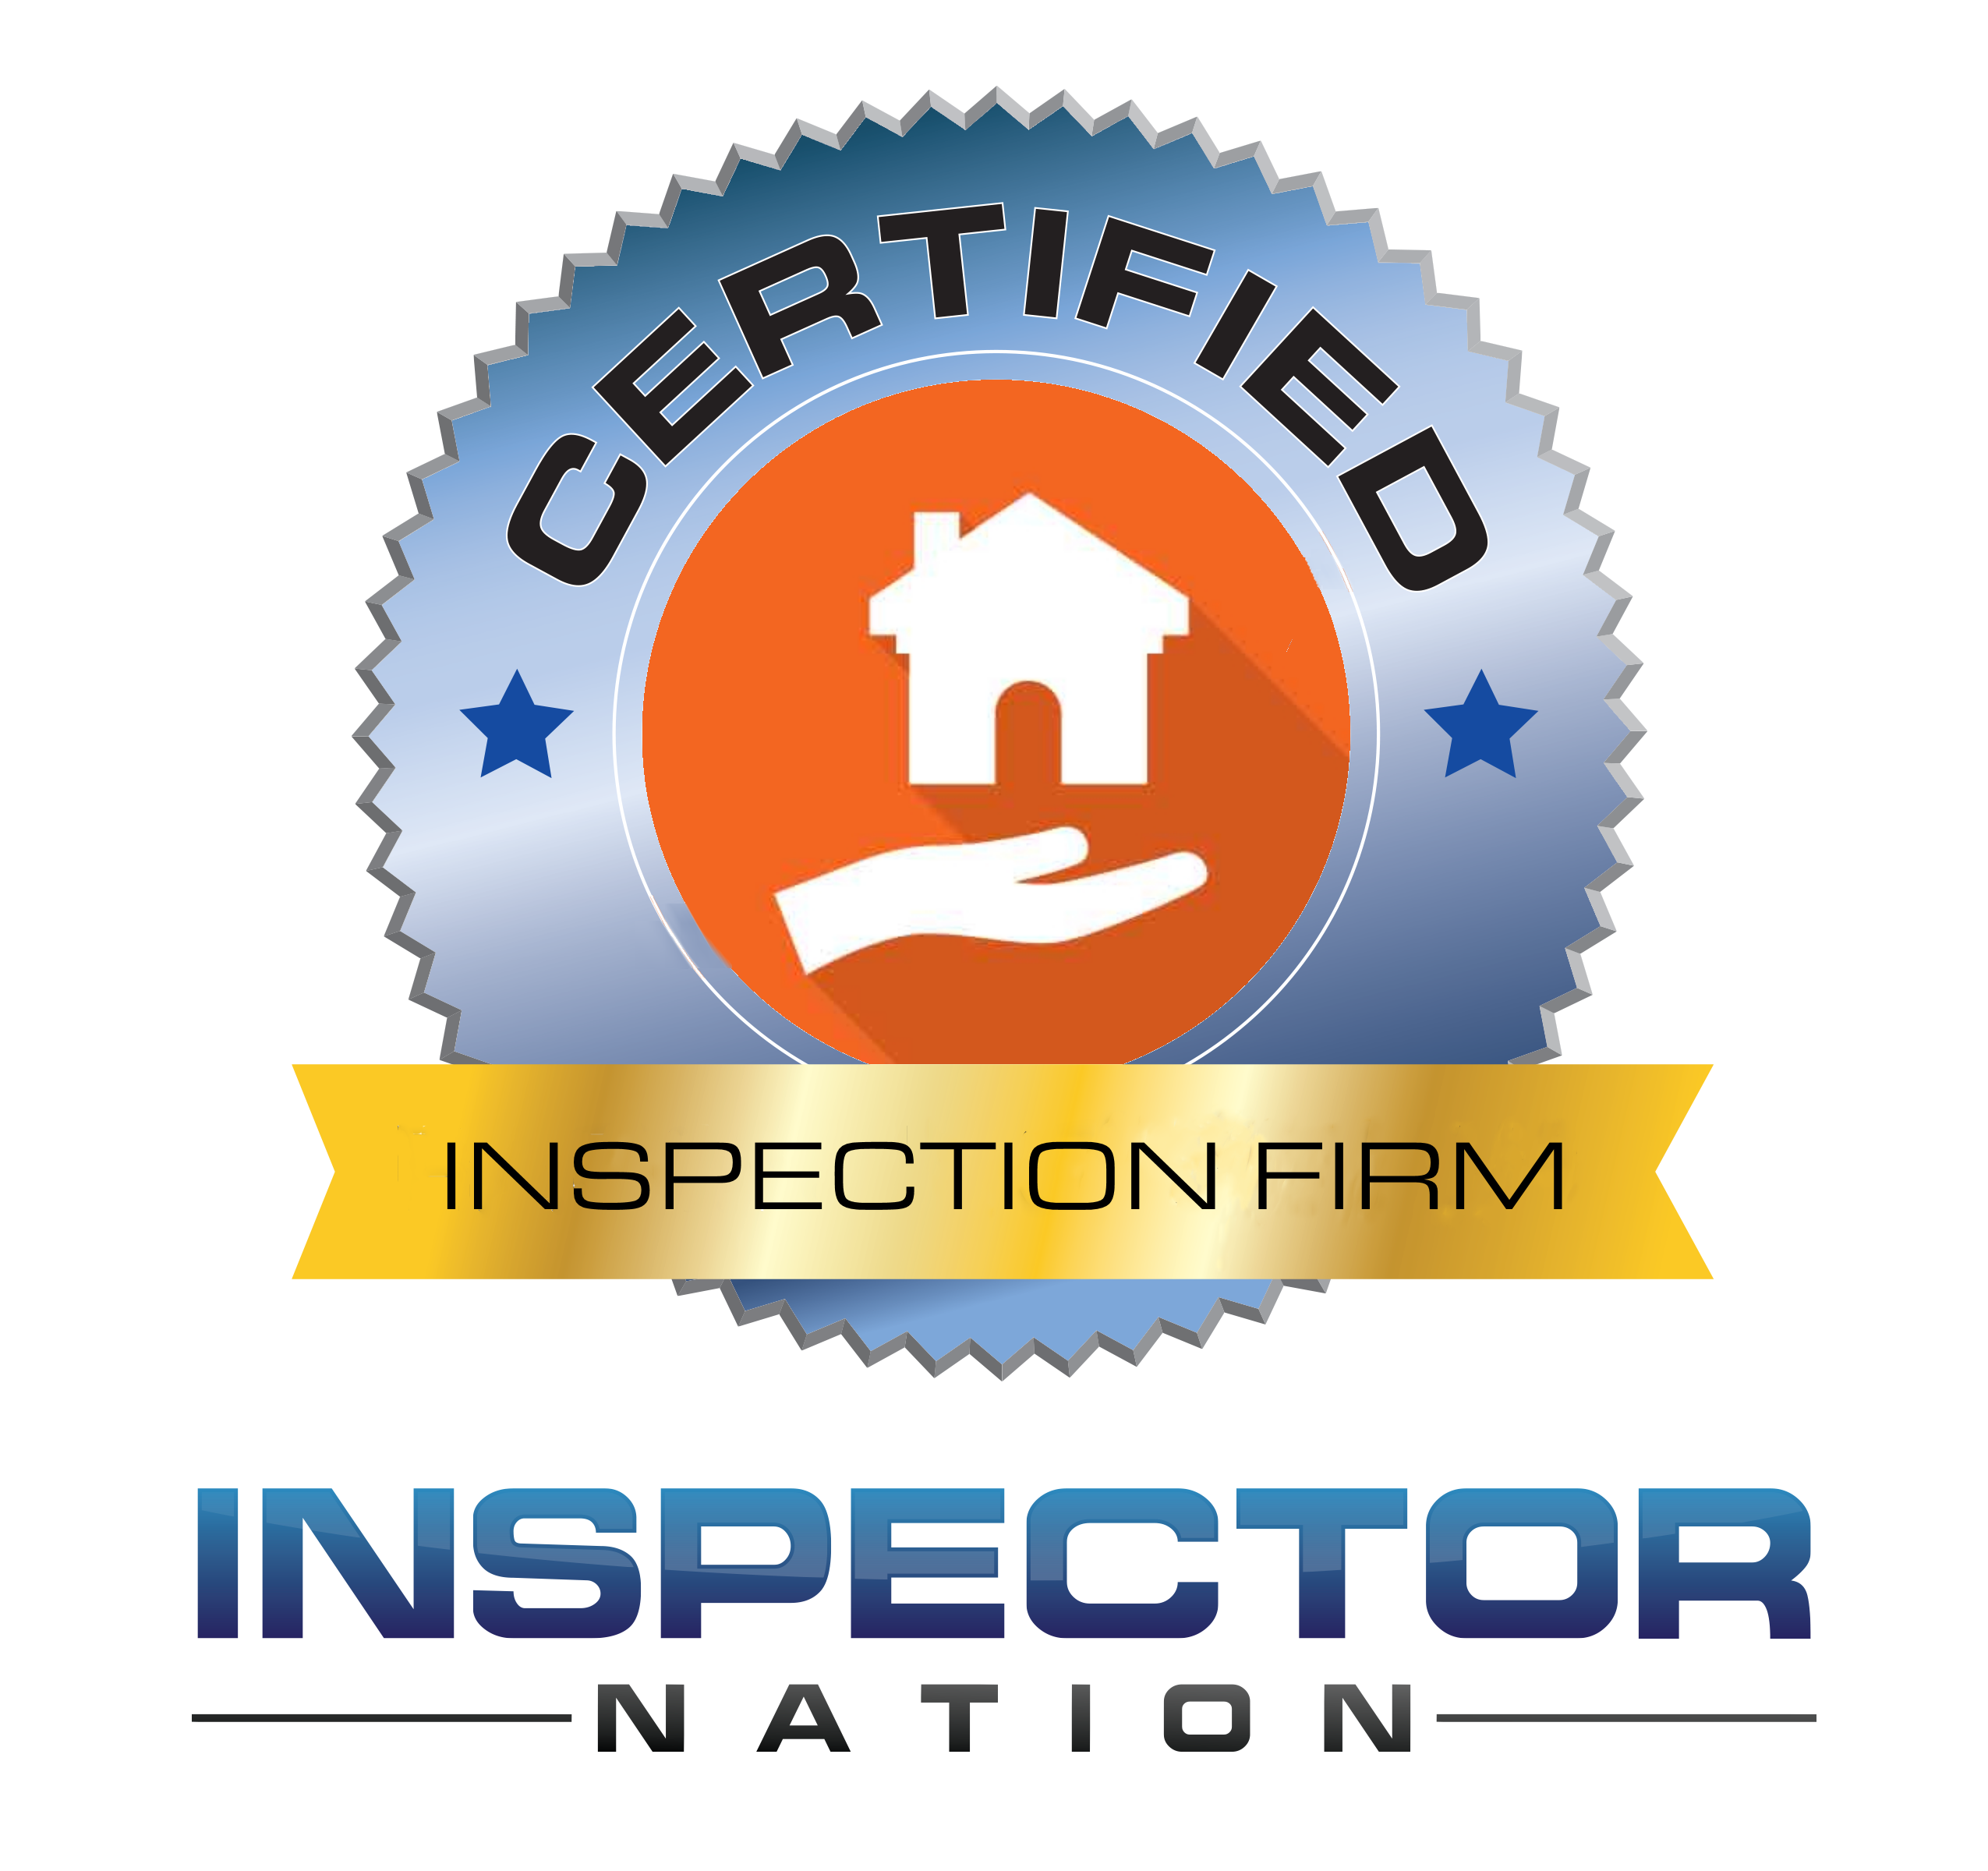  inspector nation certified home inspection firm company